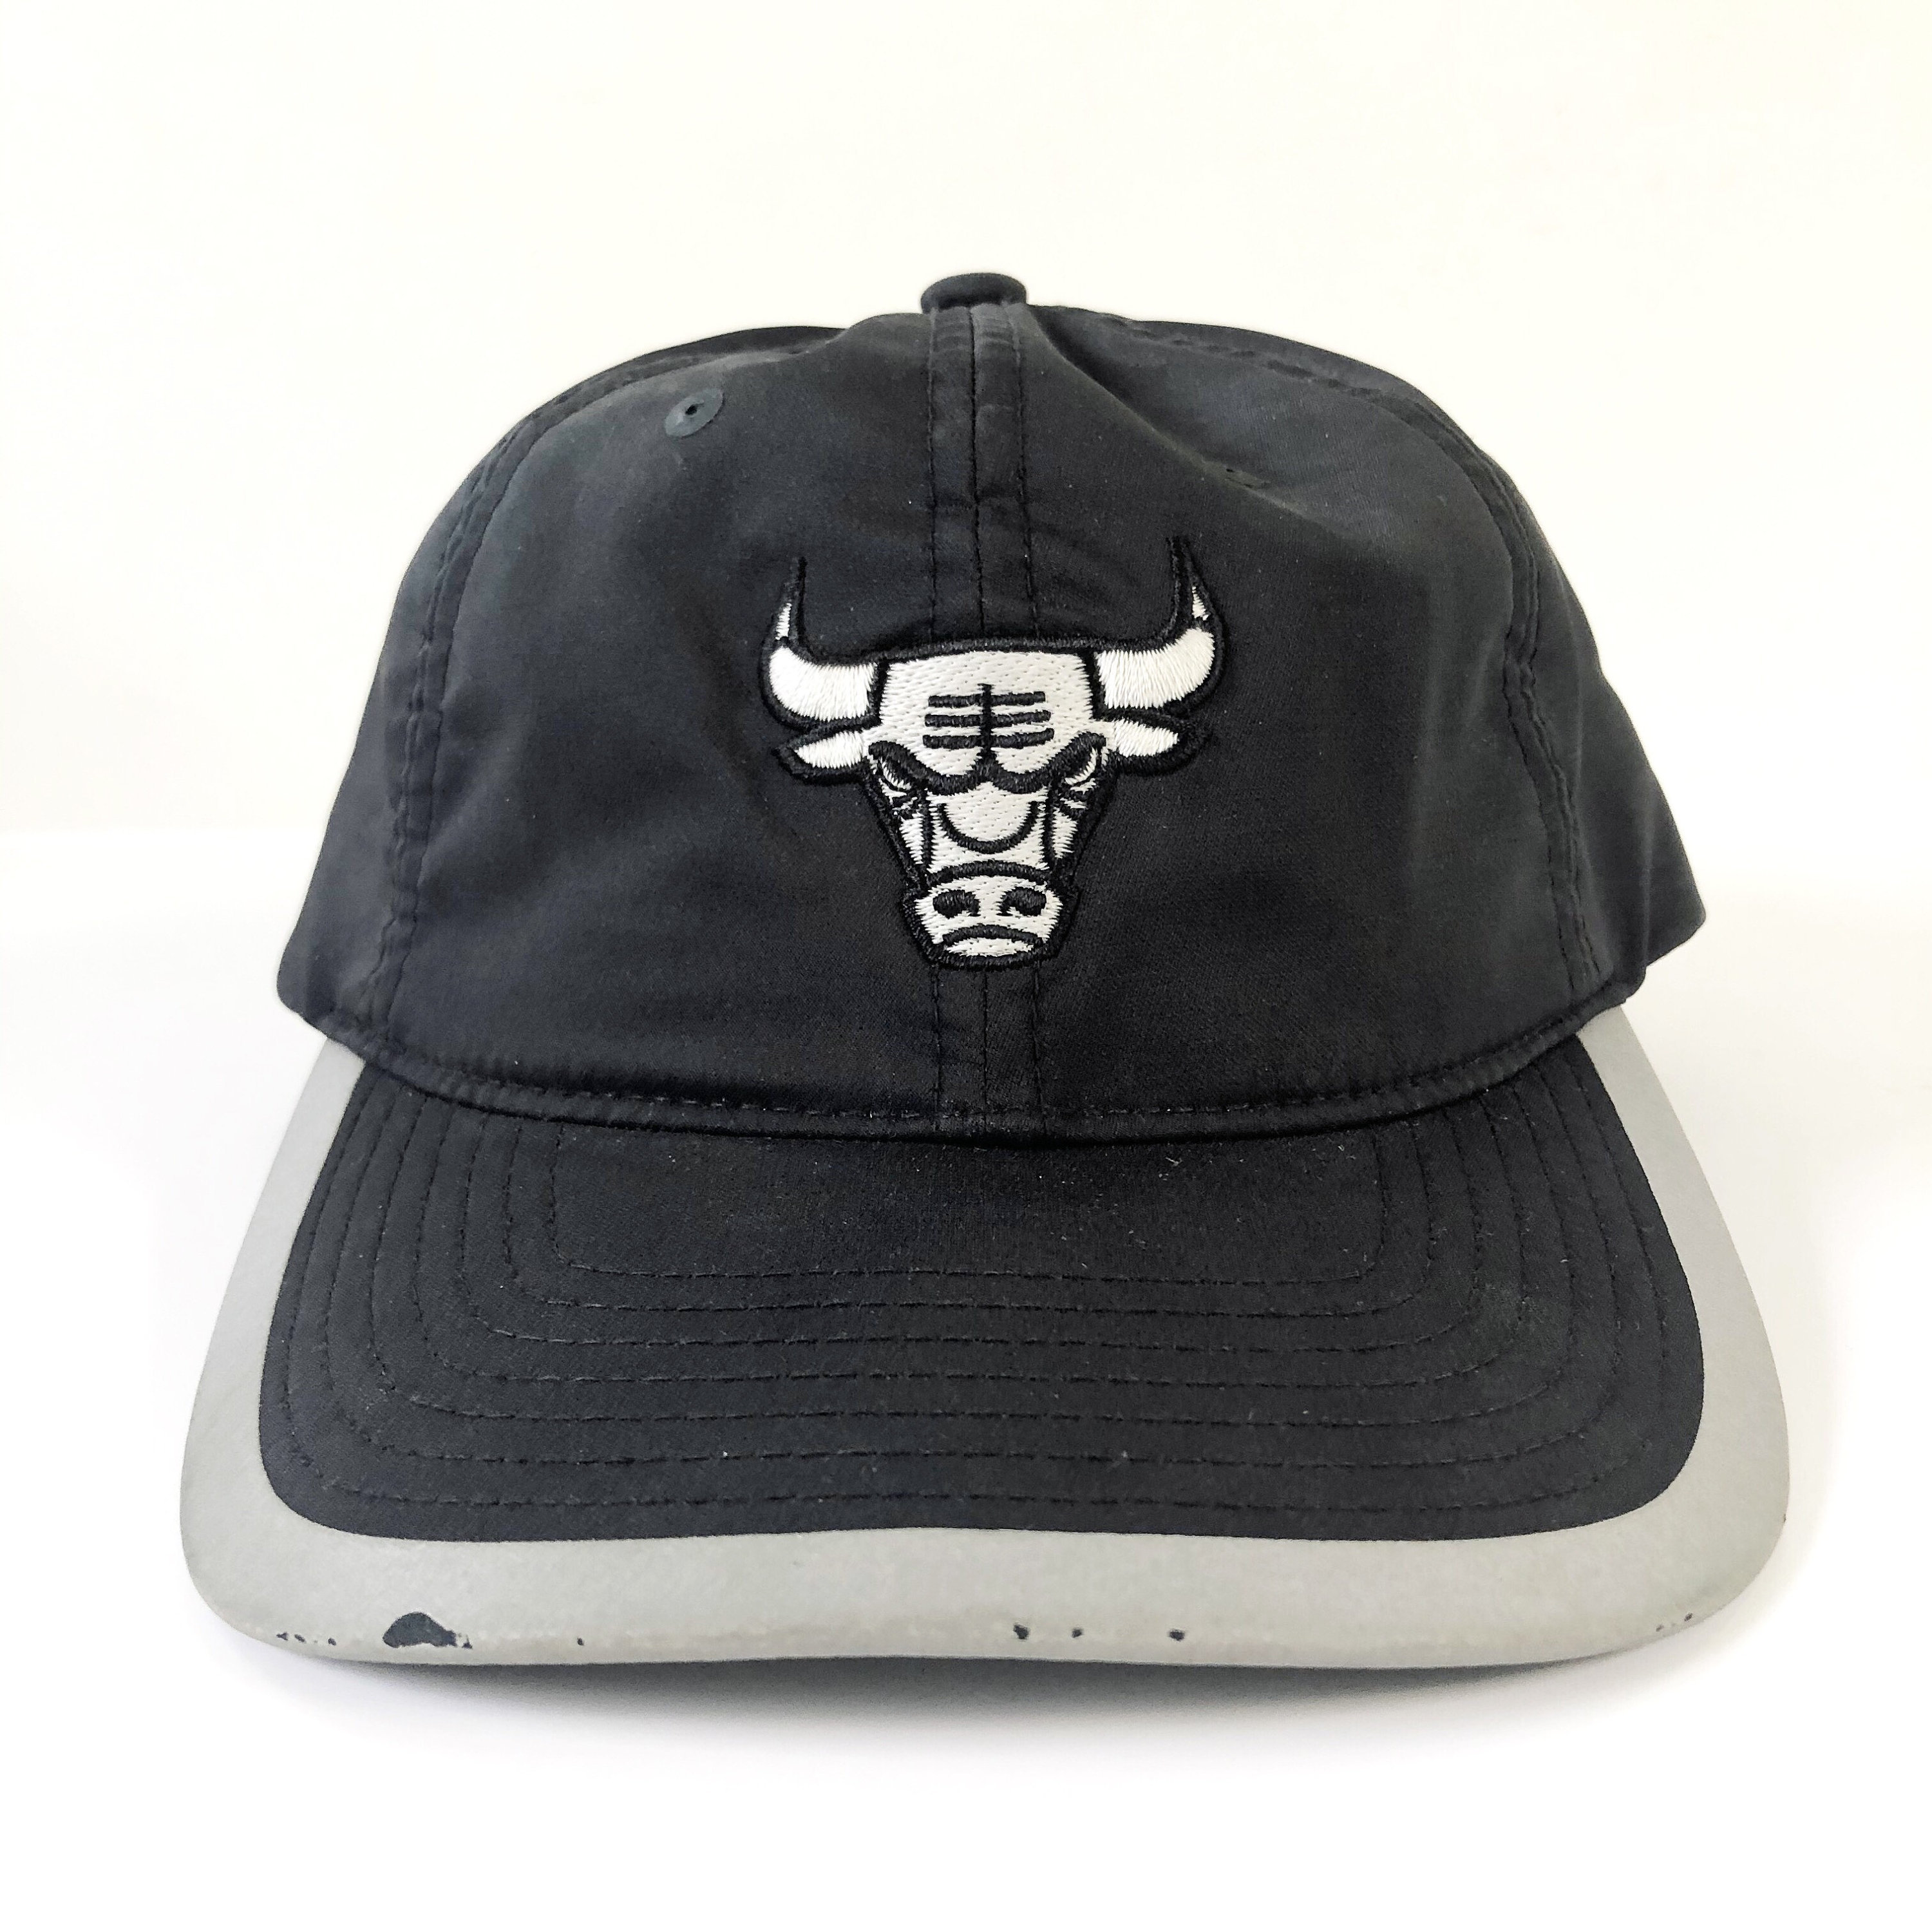 Mitchell & Ness, Accessories, Gorra Mitchell Ness Two Colors Chicago Bulls